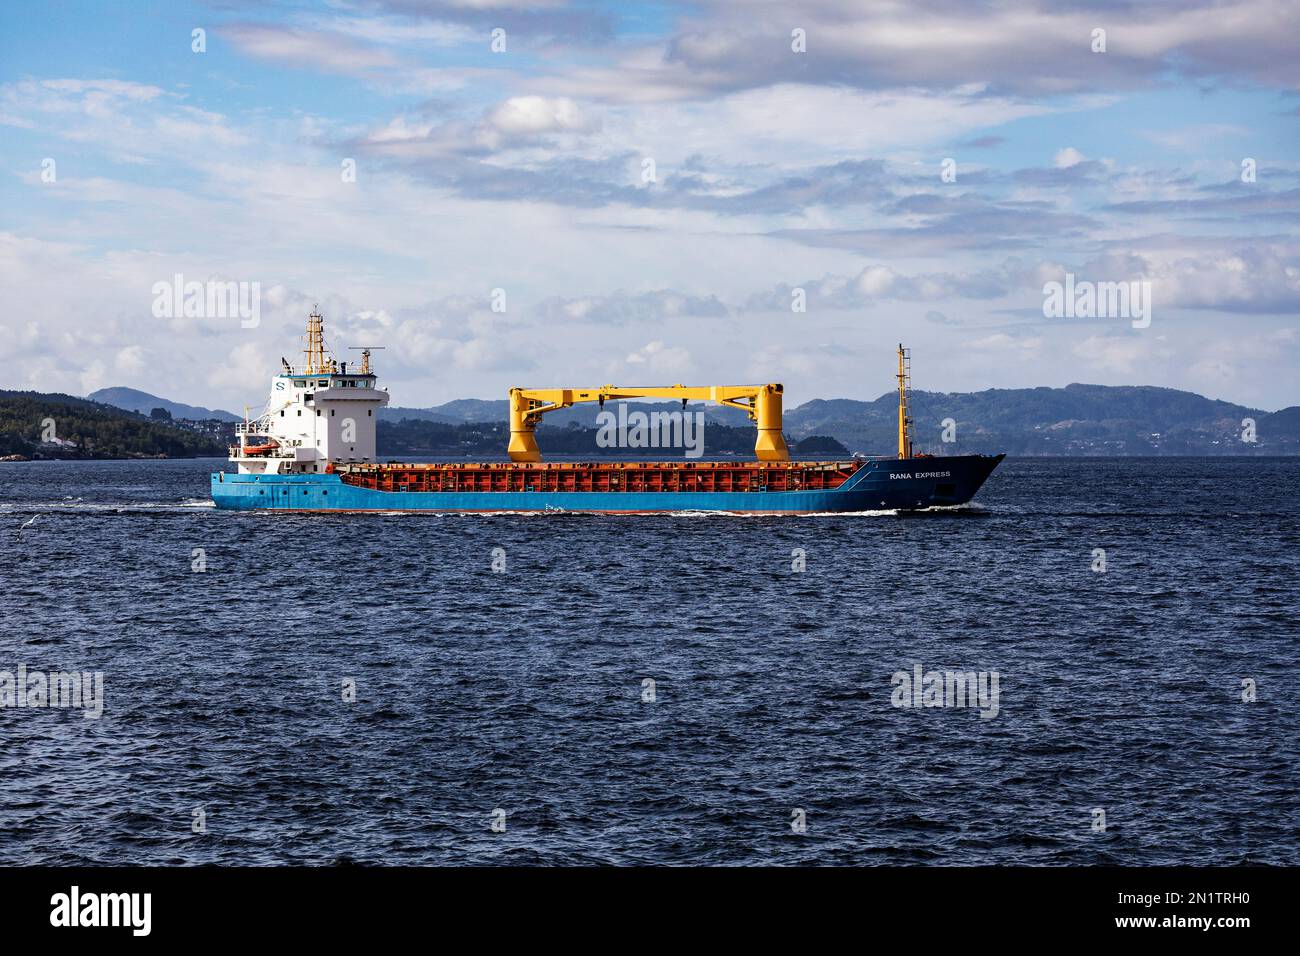 Small cargo vessel Rana Express at Byfjorden, arriving in the port of Bergen, Norway Stock Photo